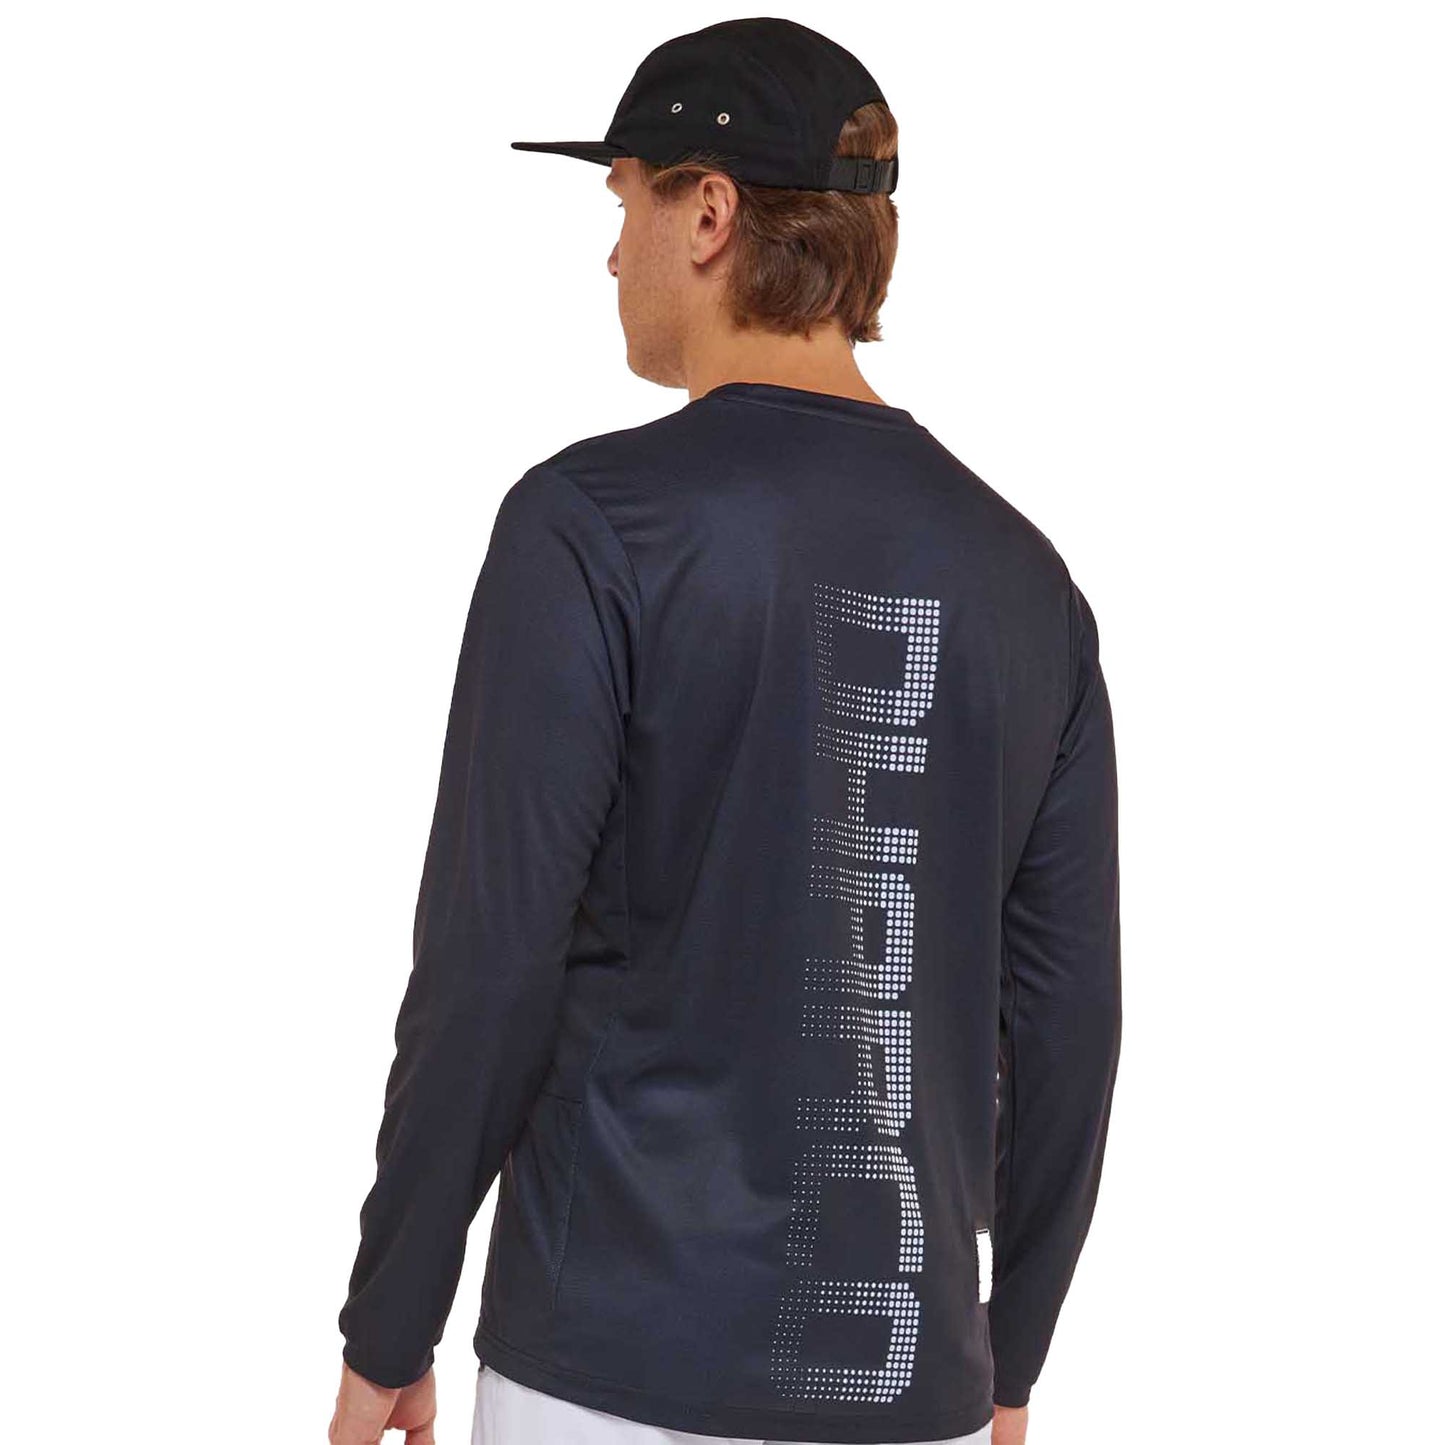 DHaRCO Men's Gravity Long Sleeve Jersey - 2XL - Stealth